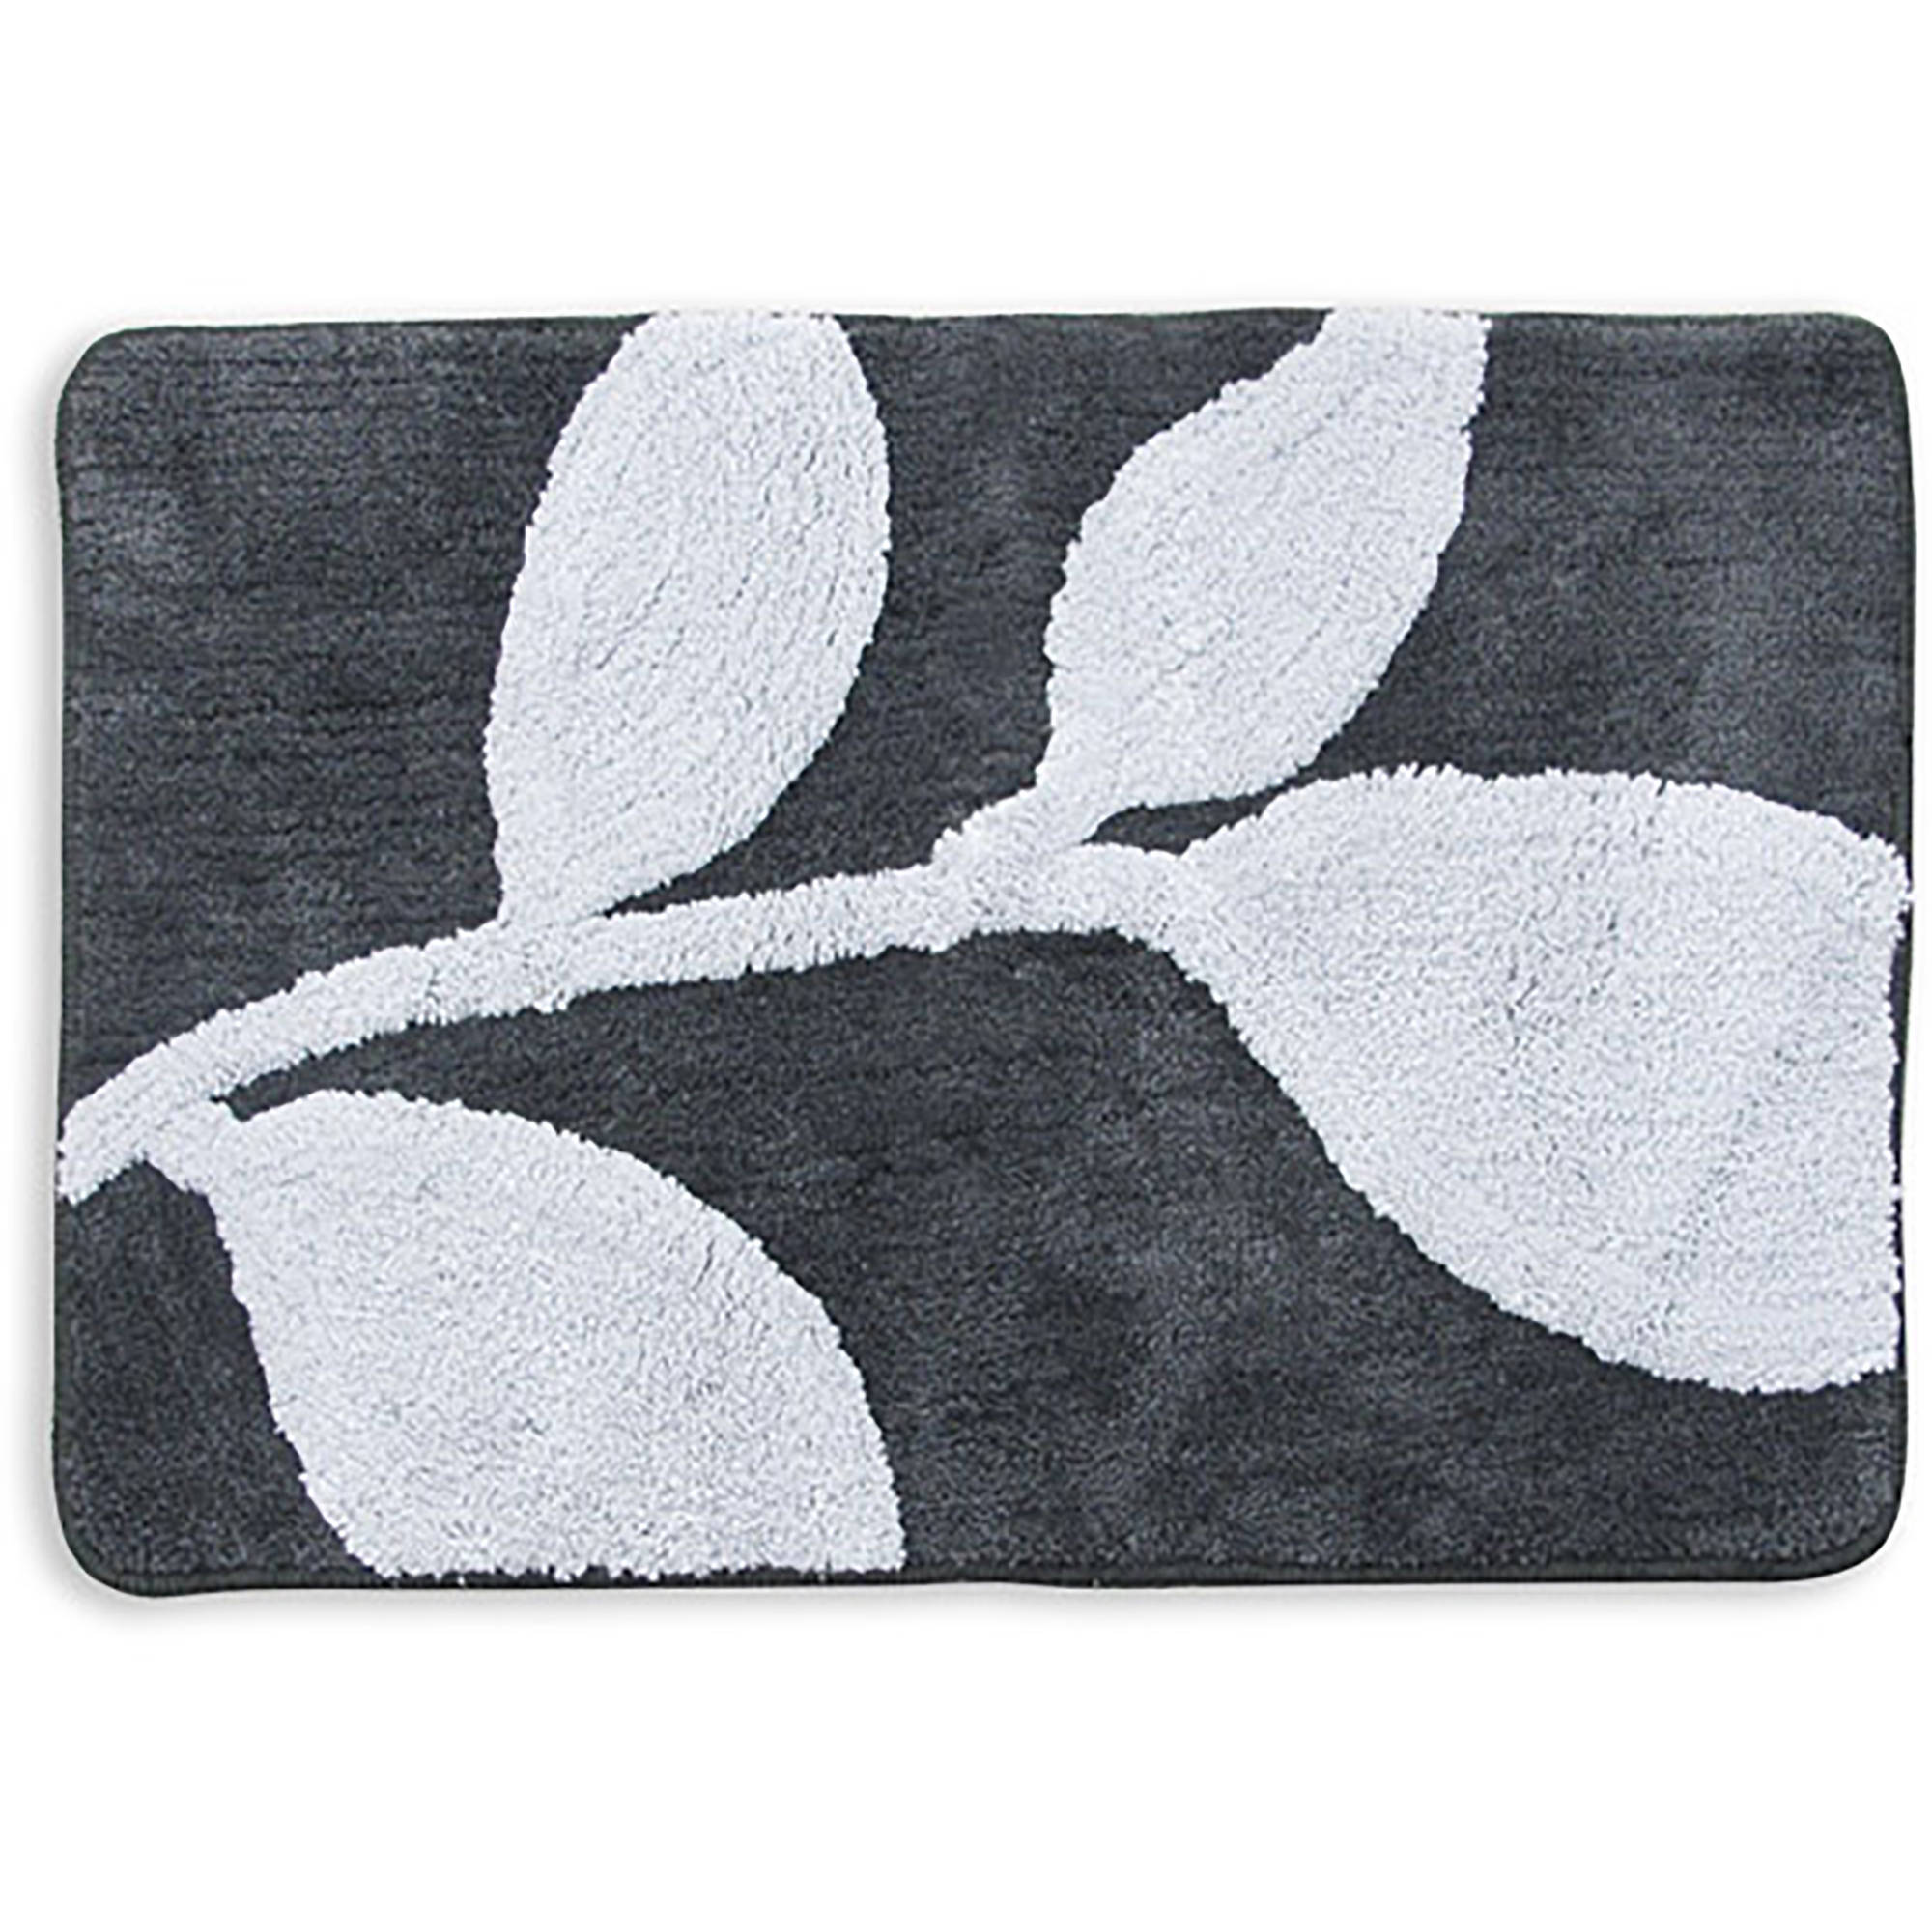 Better Homes & Gardens Tranquil Leaves Bath Rug, 1 Each - image 1 of 2